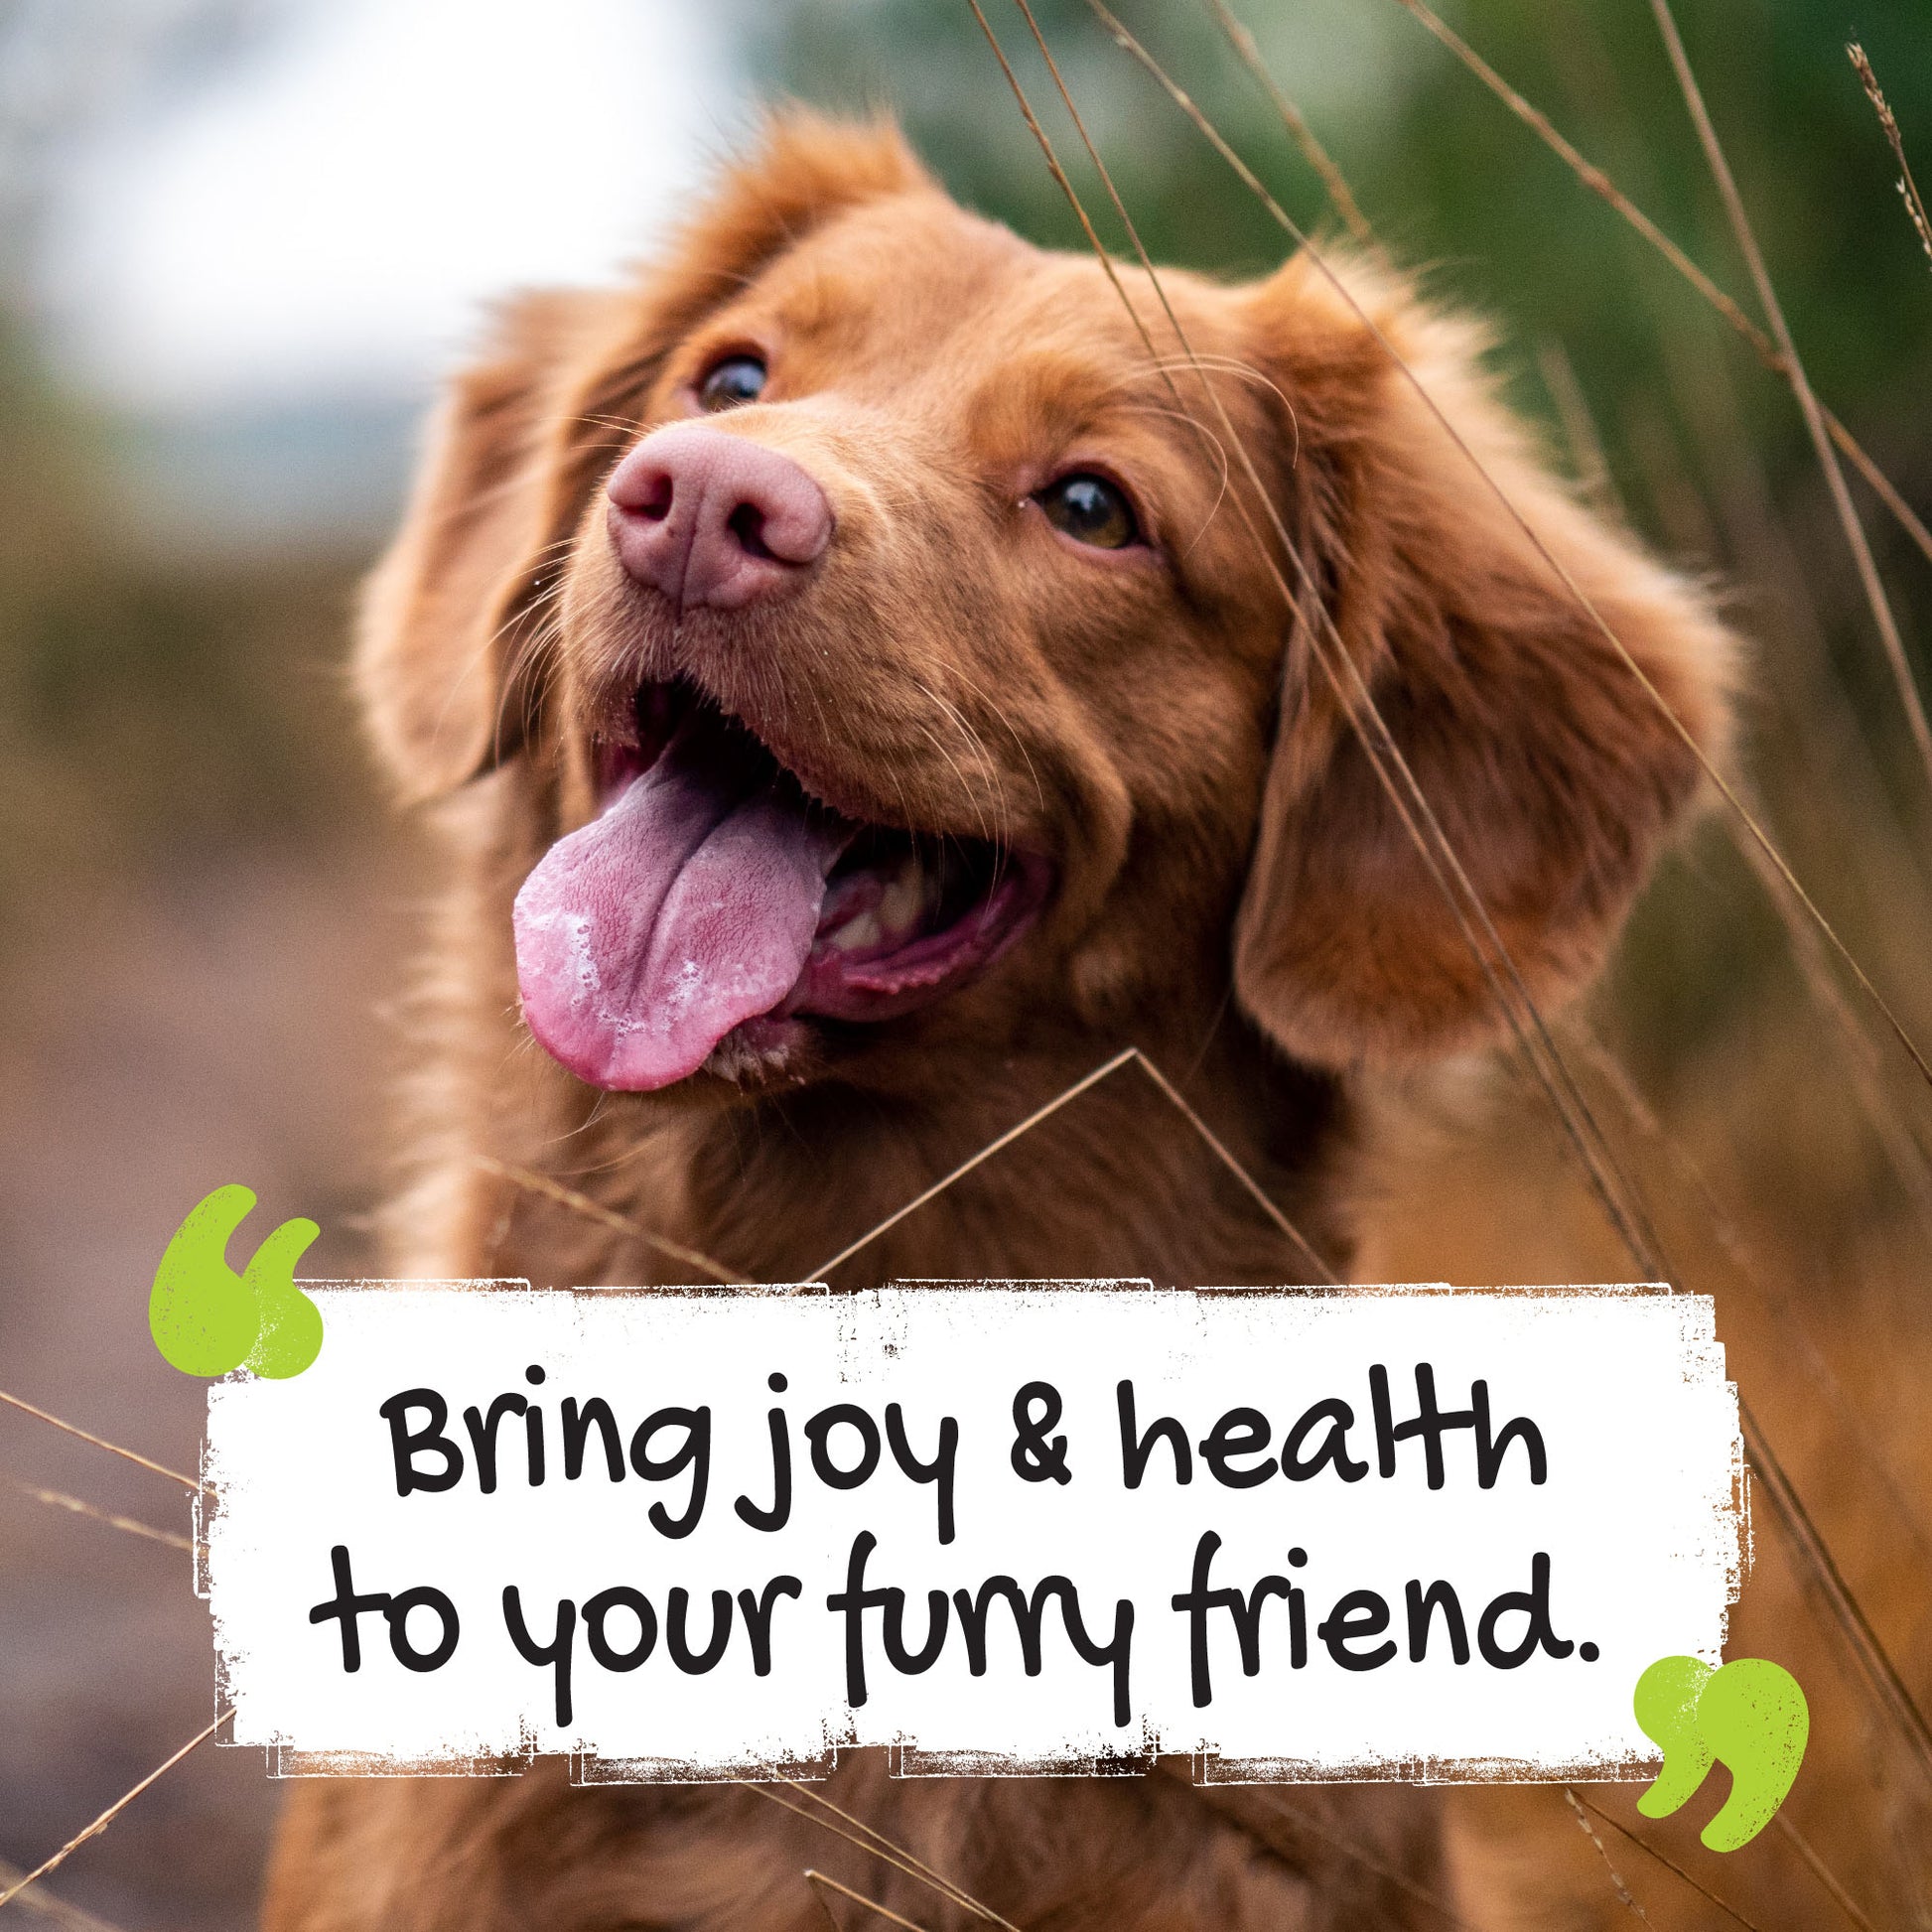 Bring joy and health to furry friend